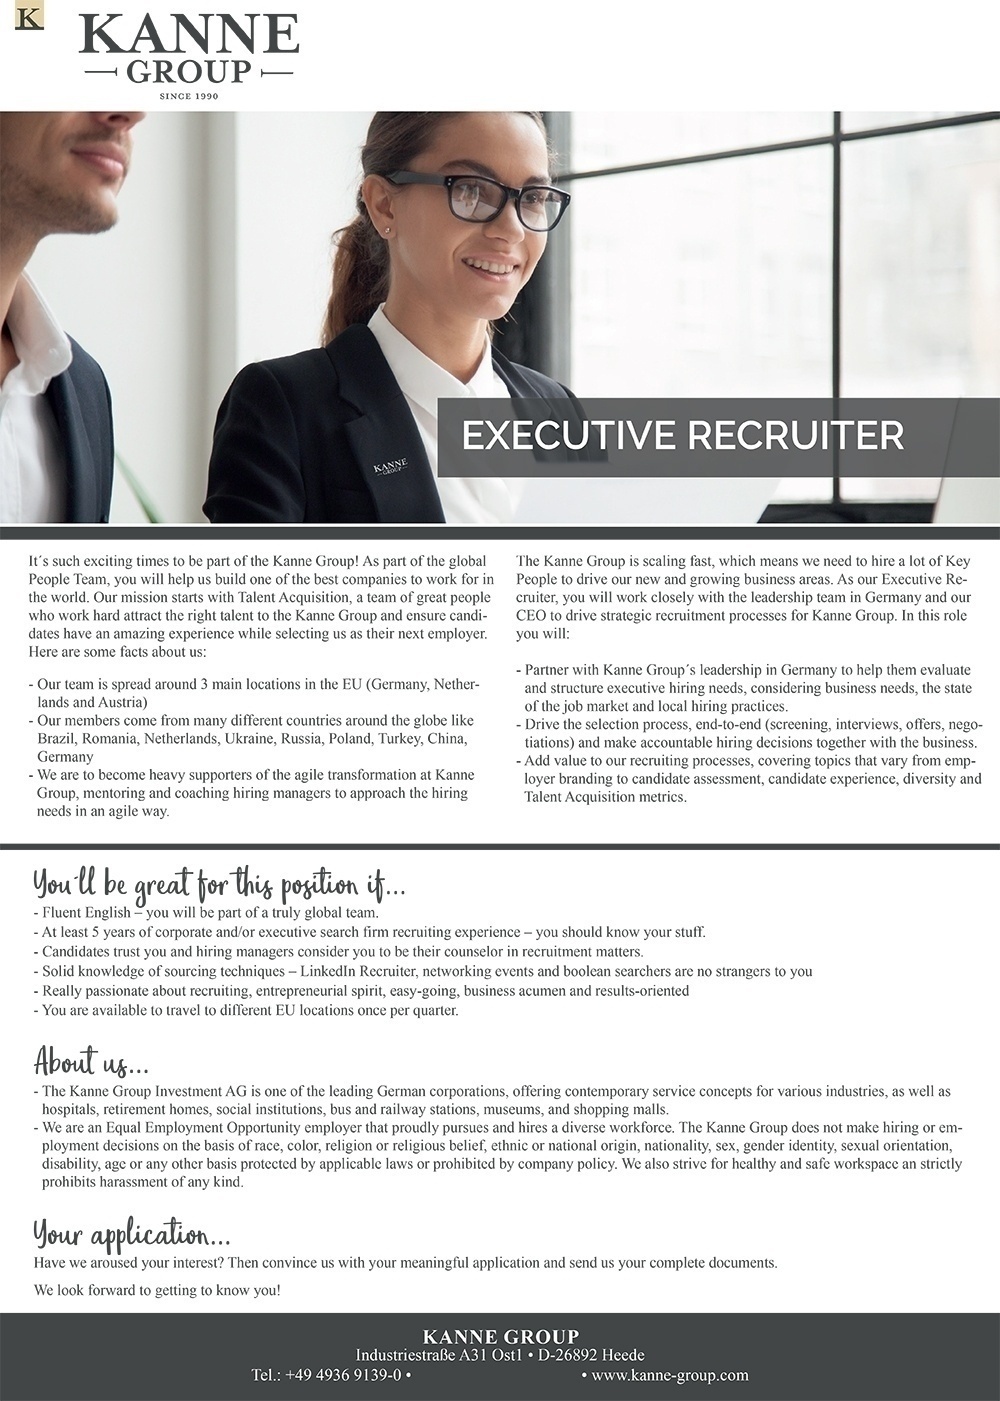 Kanne Immobilien GmbH & Co. KG Executive Recruiter